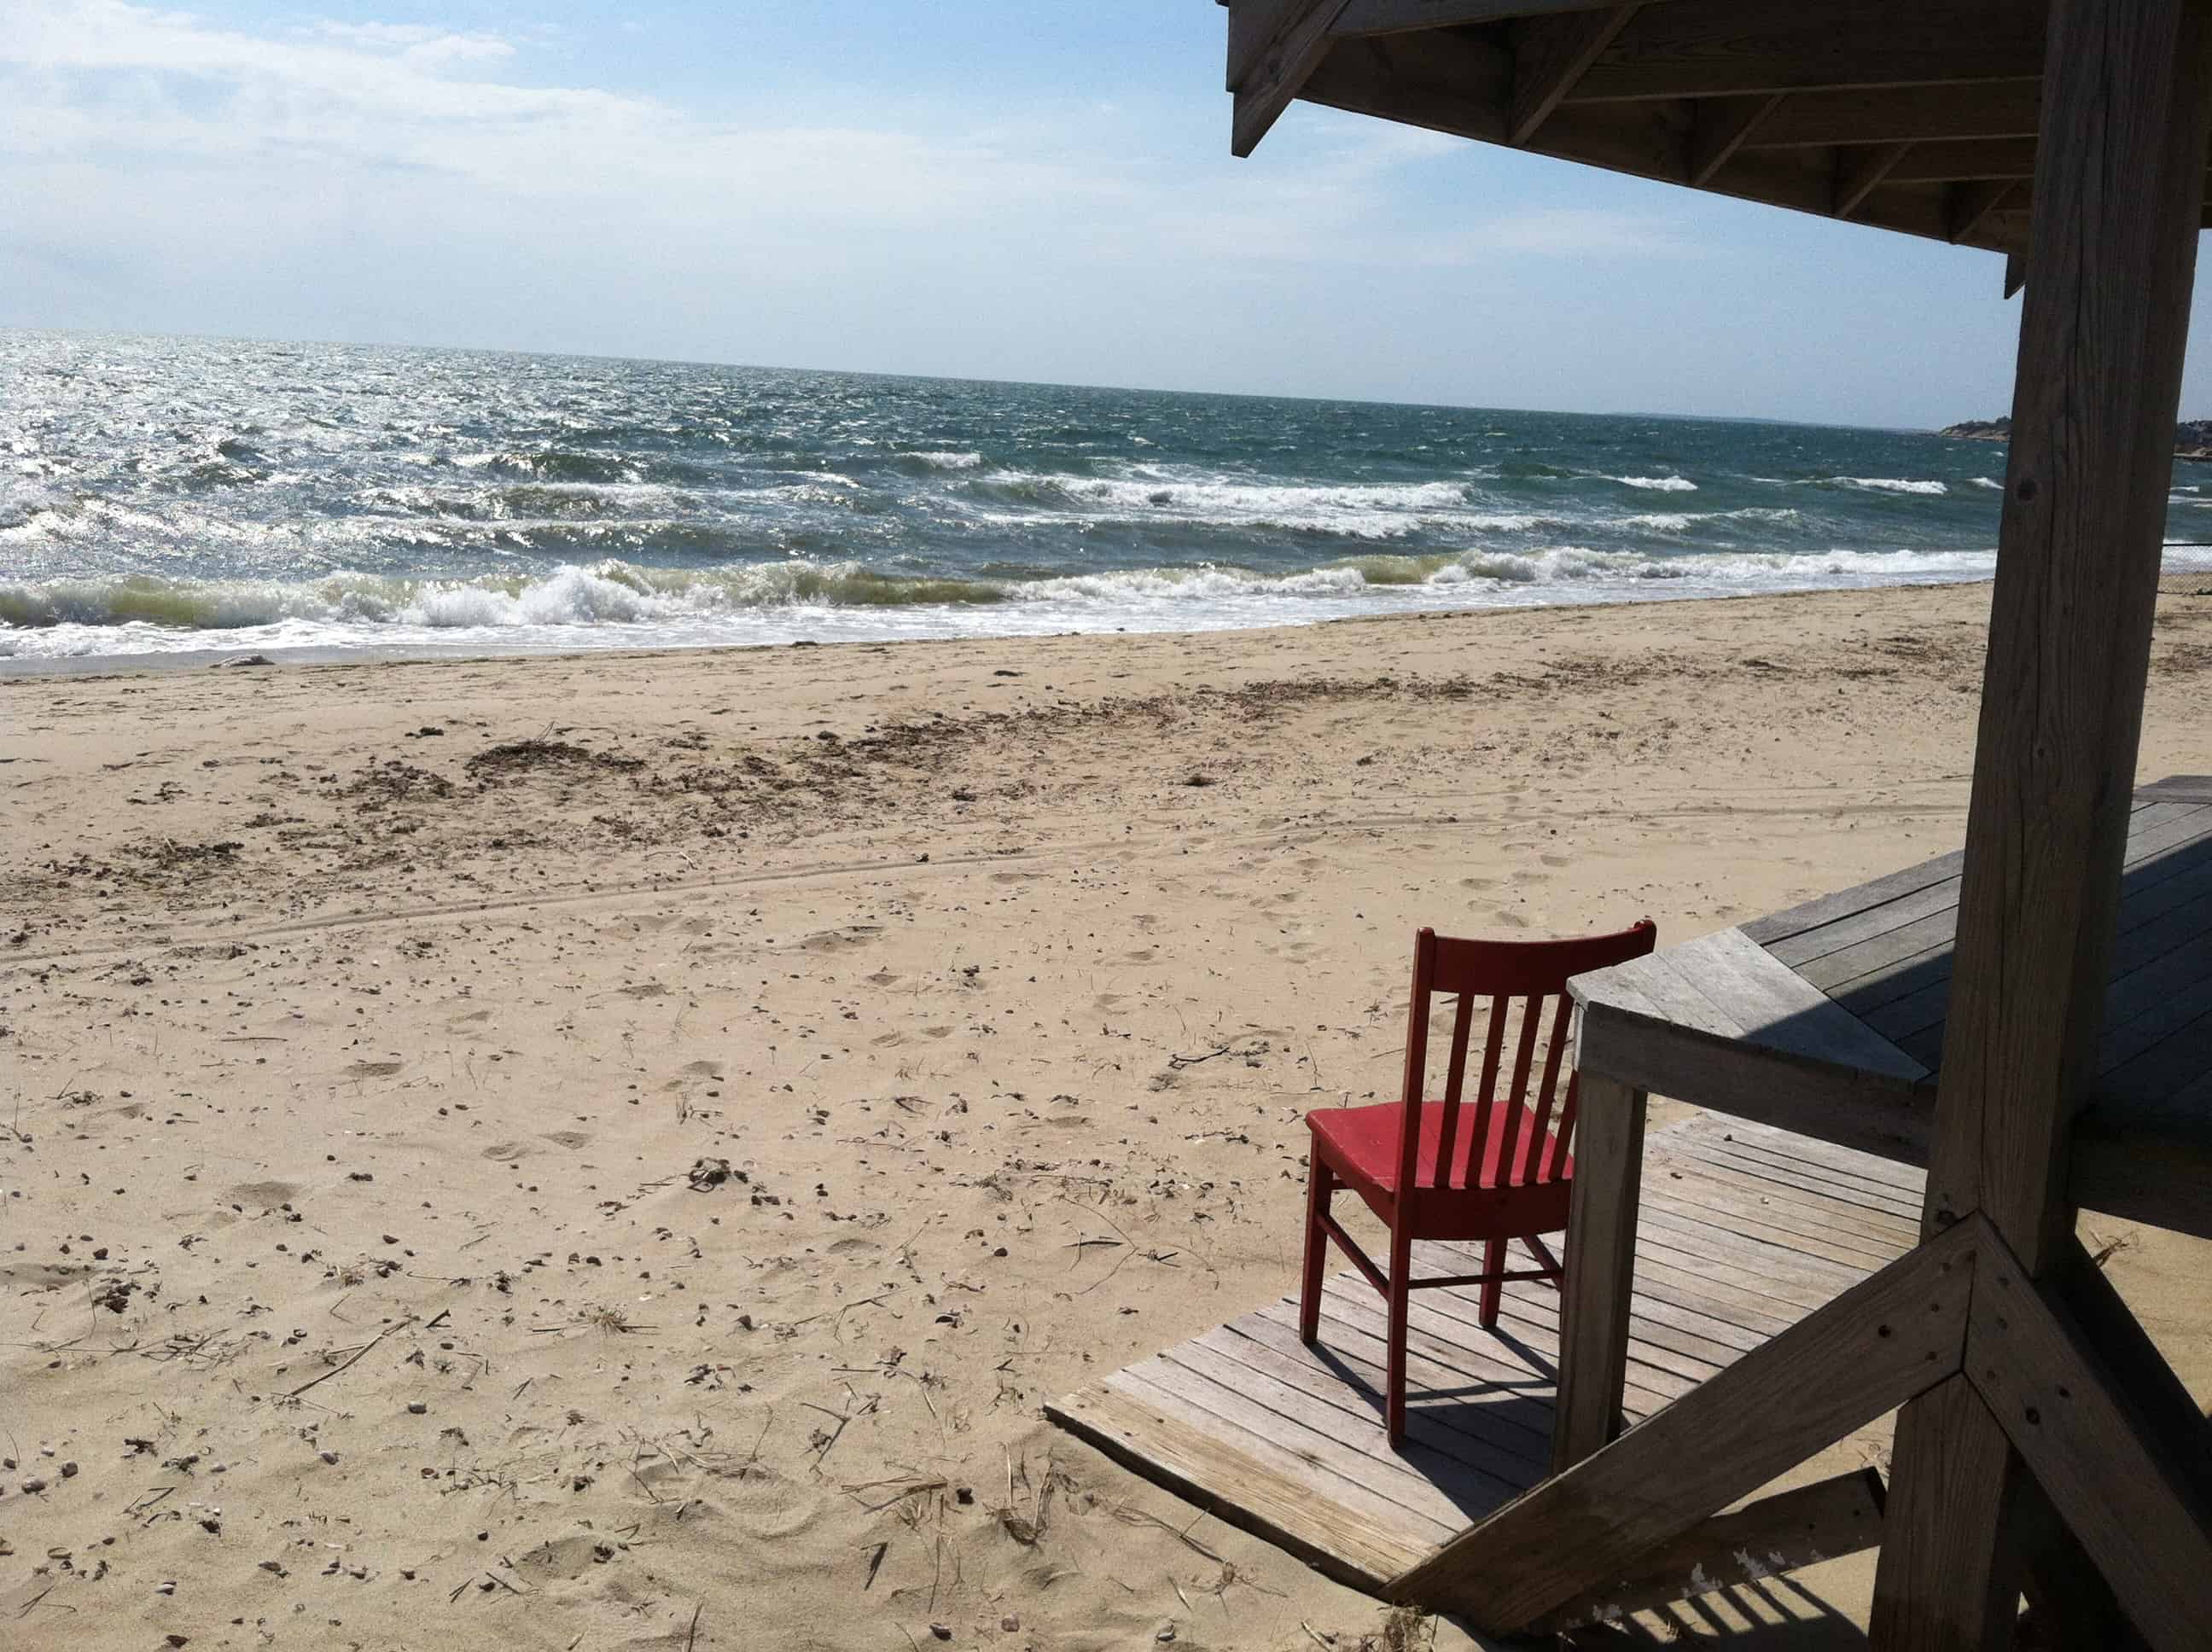 New Cape Cod Beach Chair Harwich Ma for Large Space